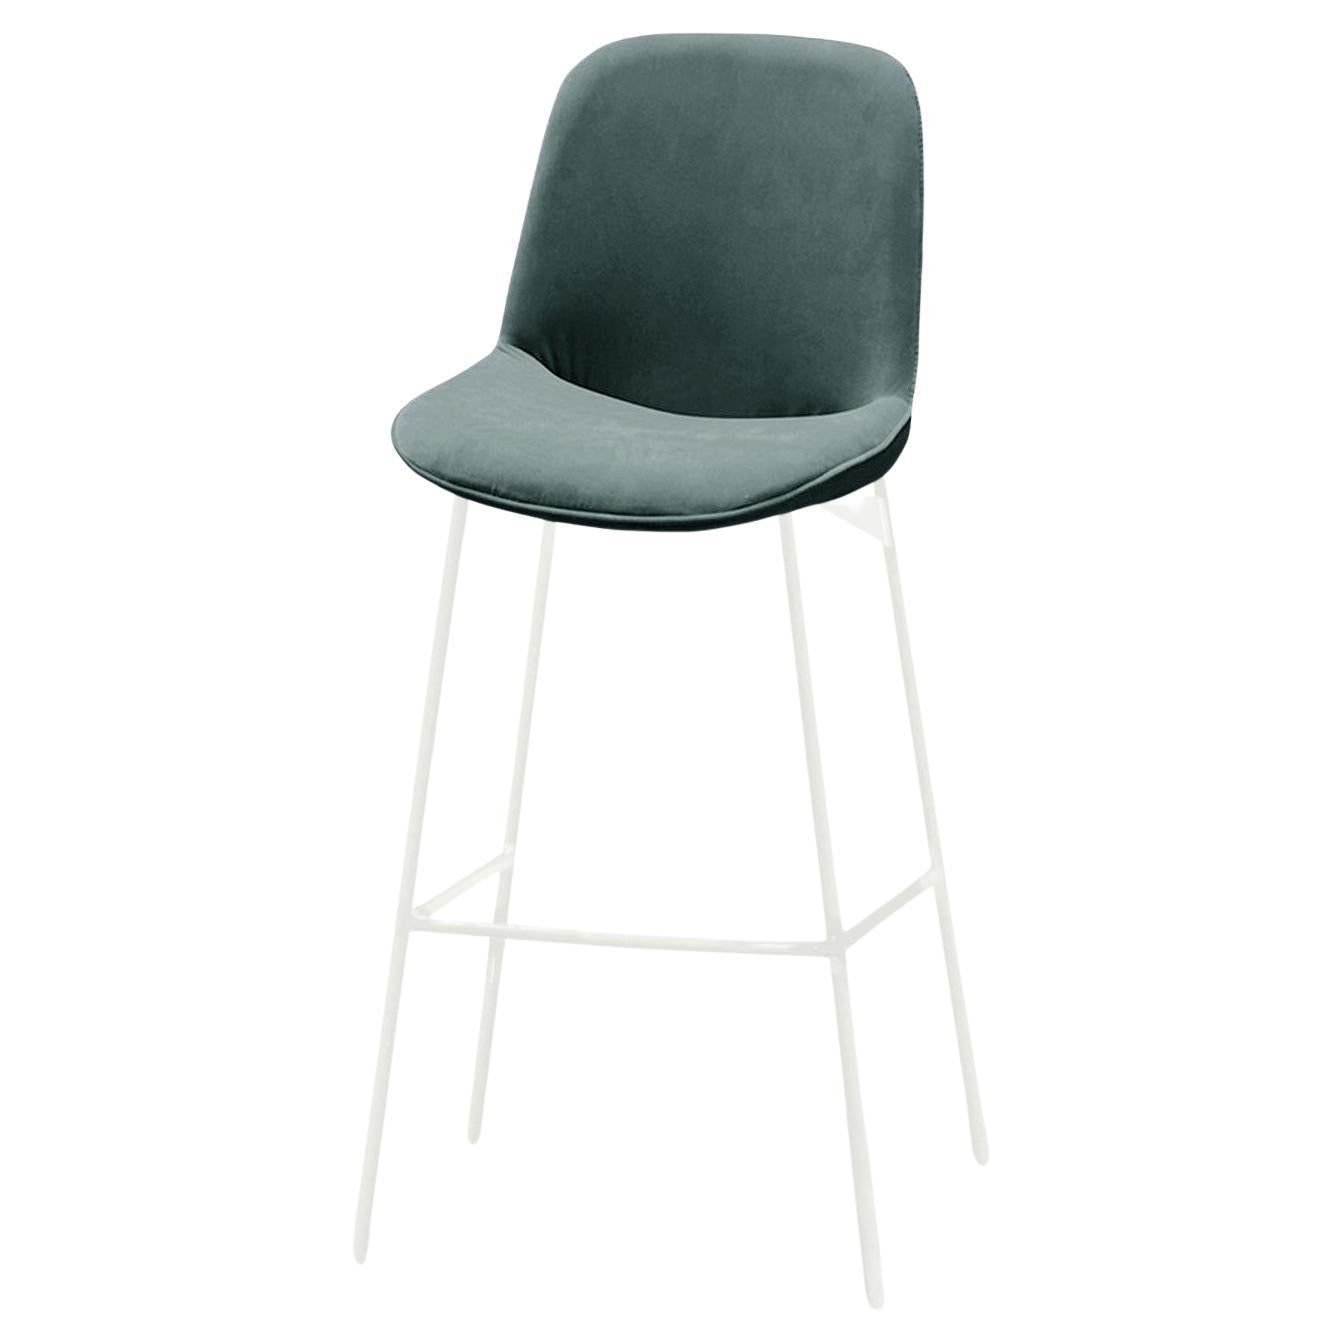 Chiado Bar Stool, Eucalyptus Leather with Teal and White